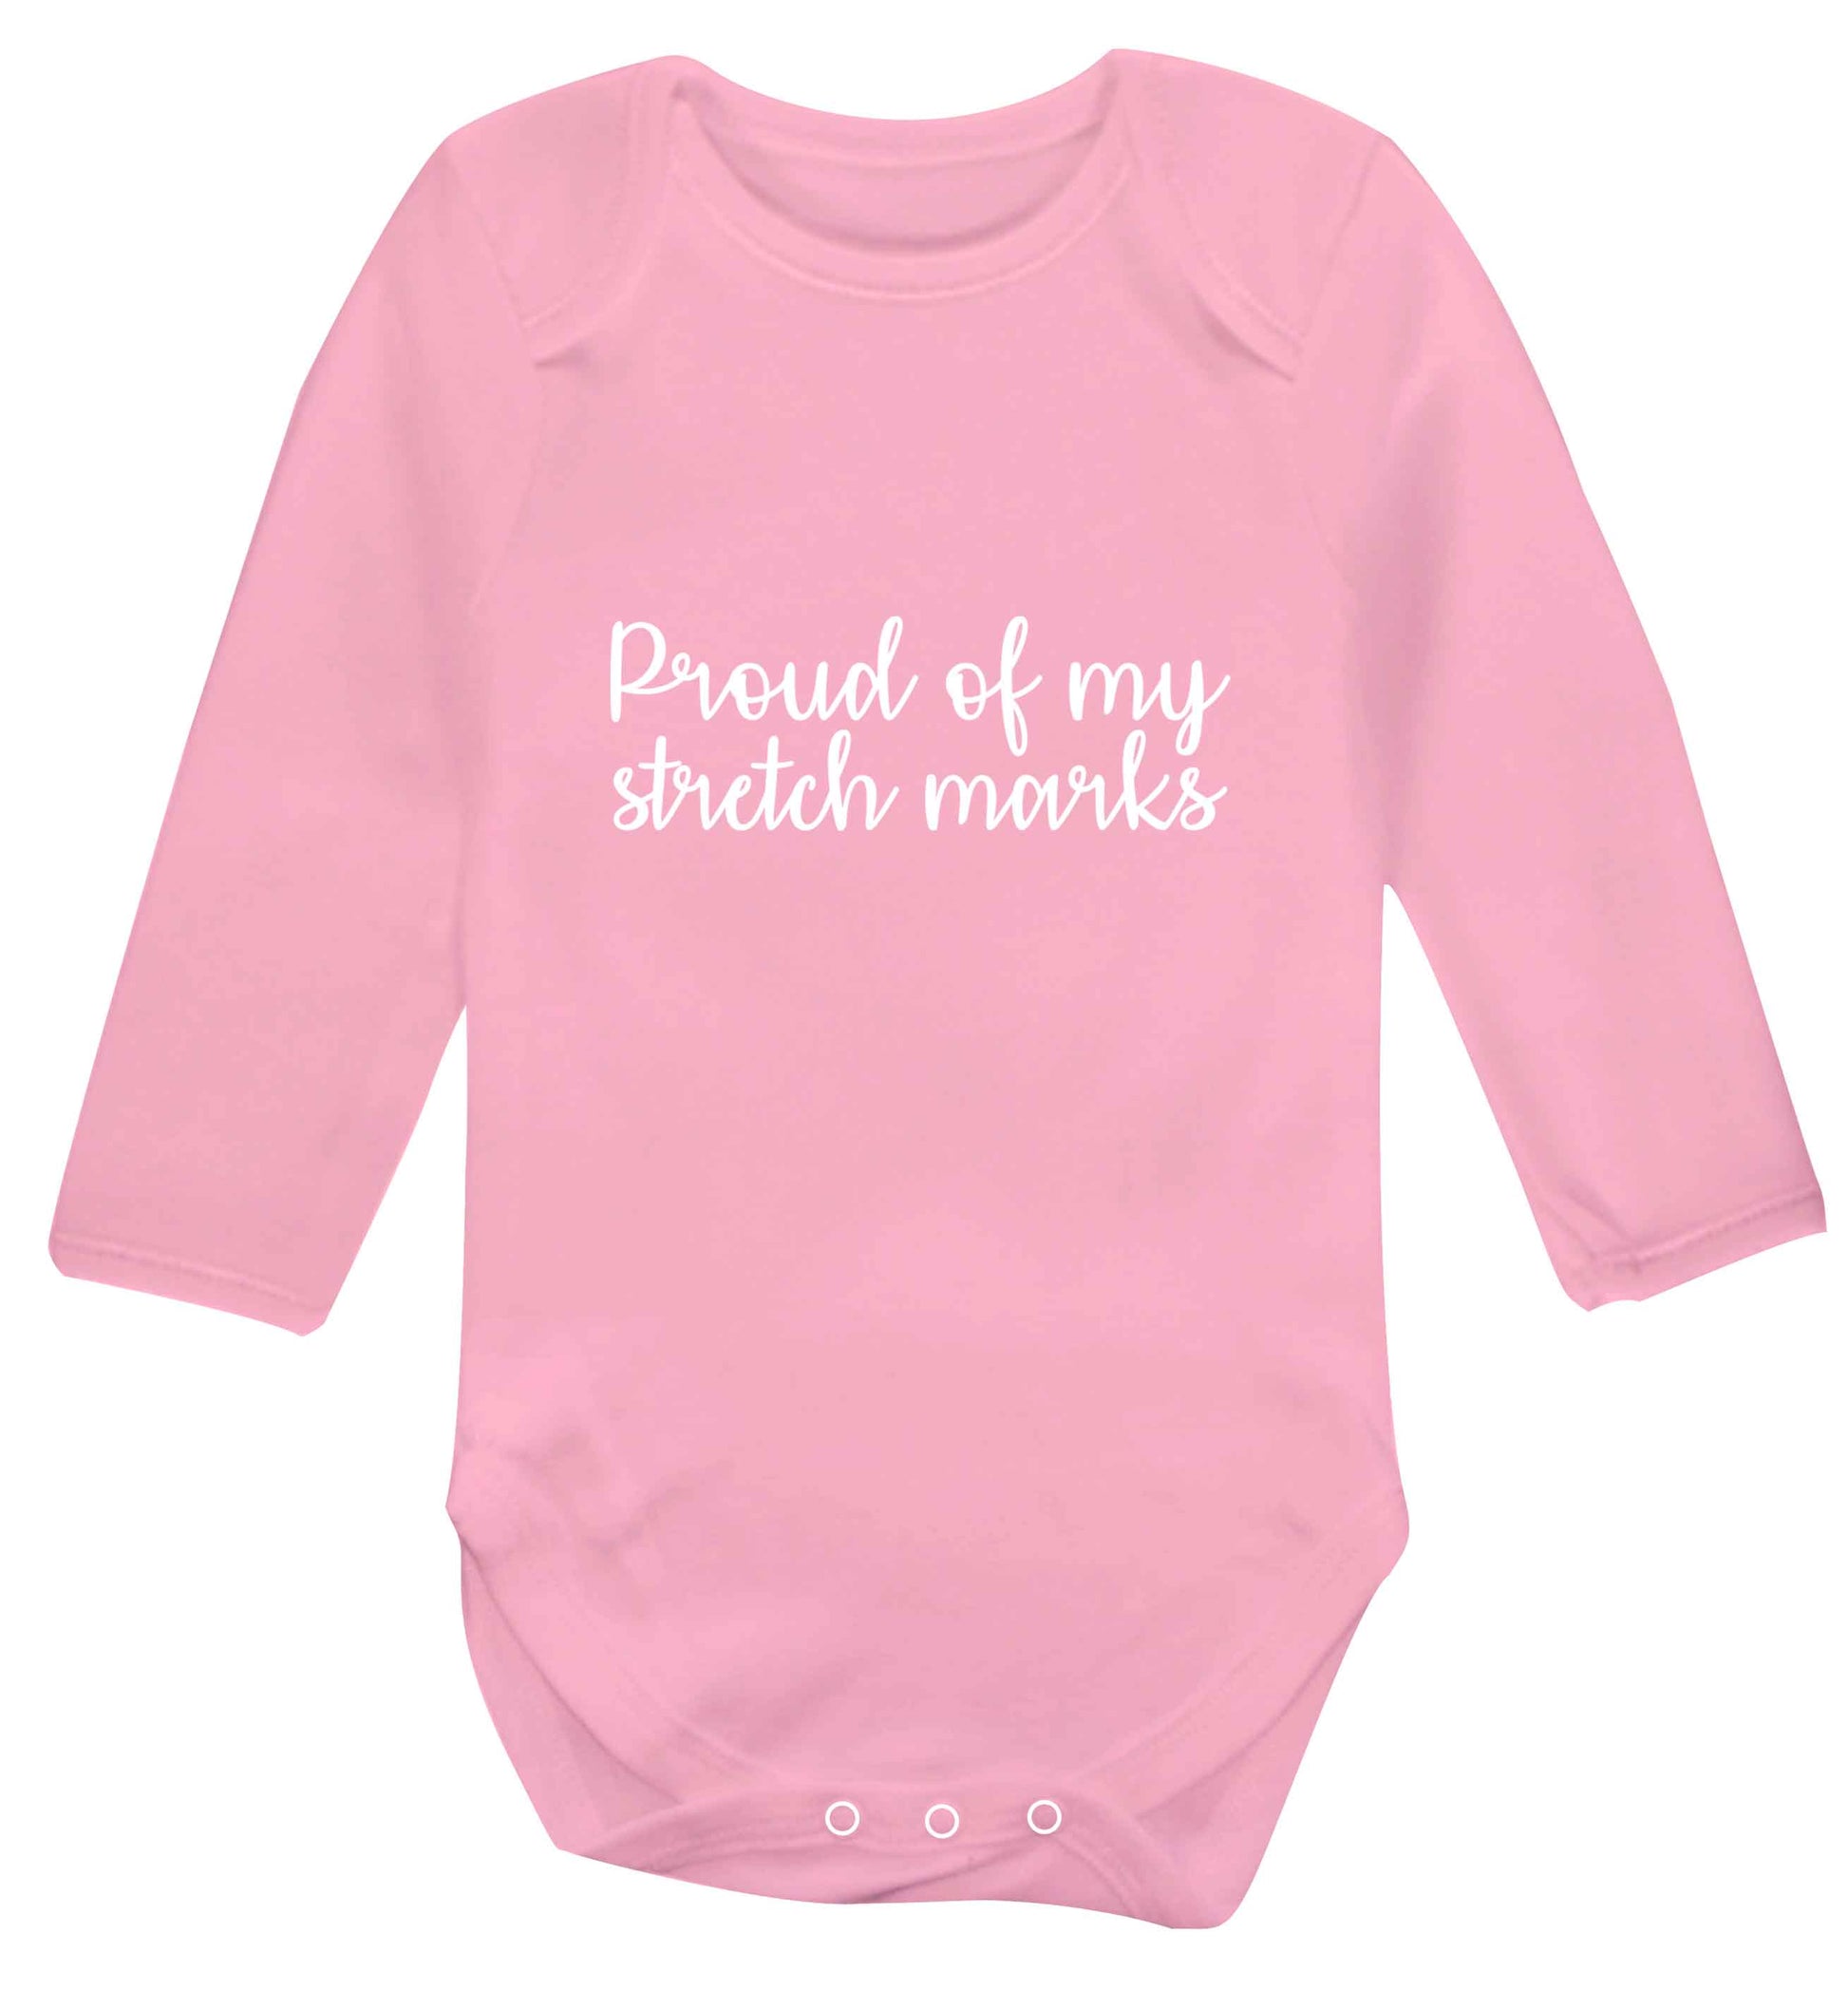 Proud of my stretch marks baby vest long sleeved pale pink 6-12 months